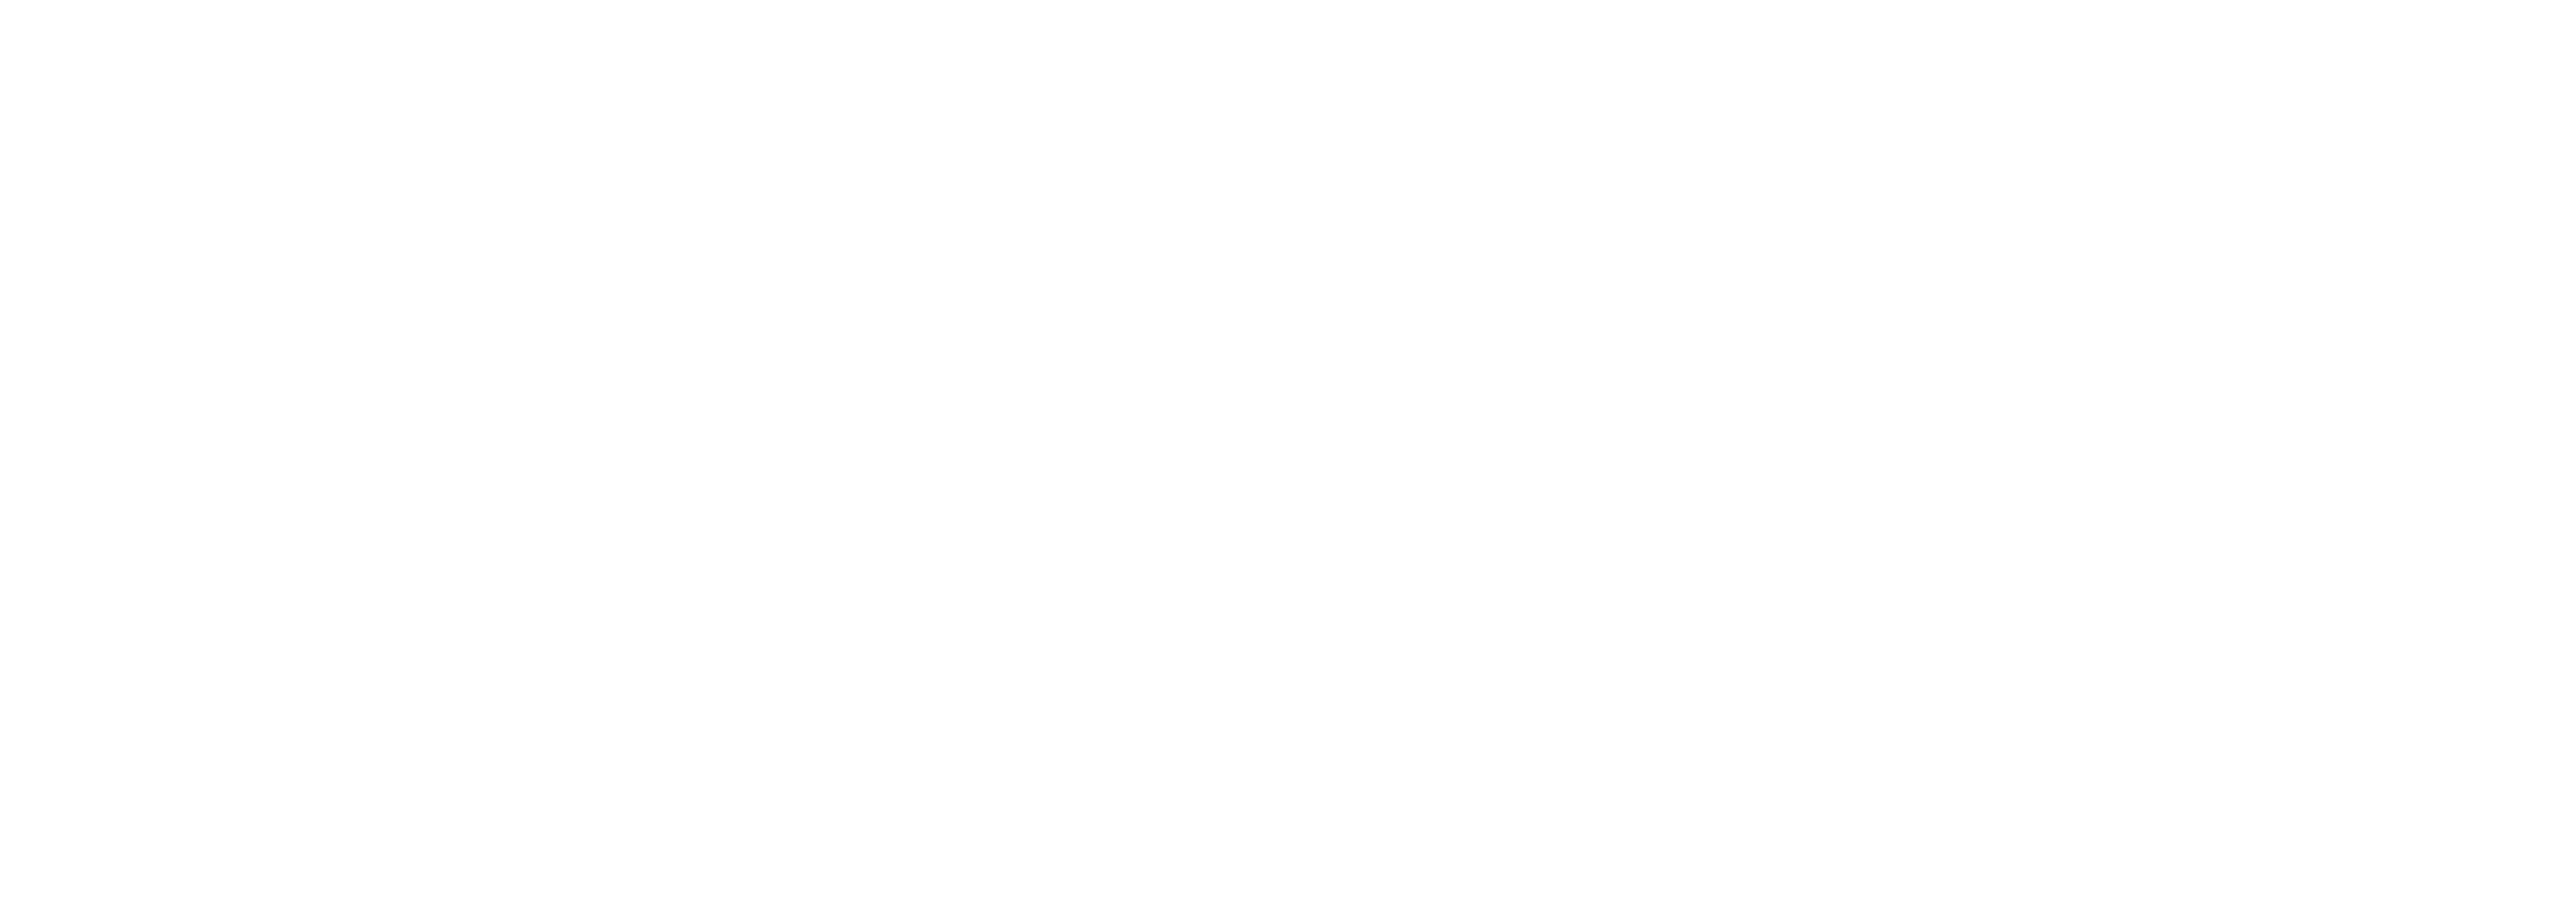 PayFast By Network - White